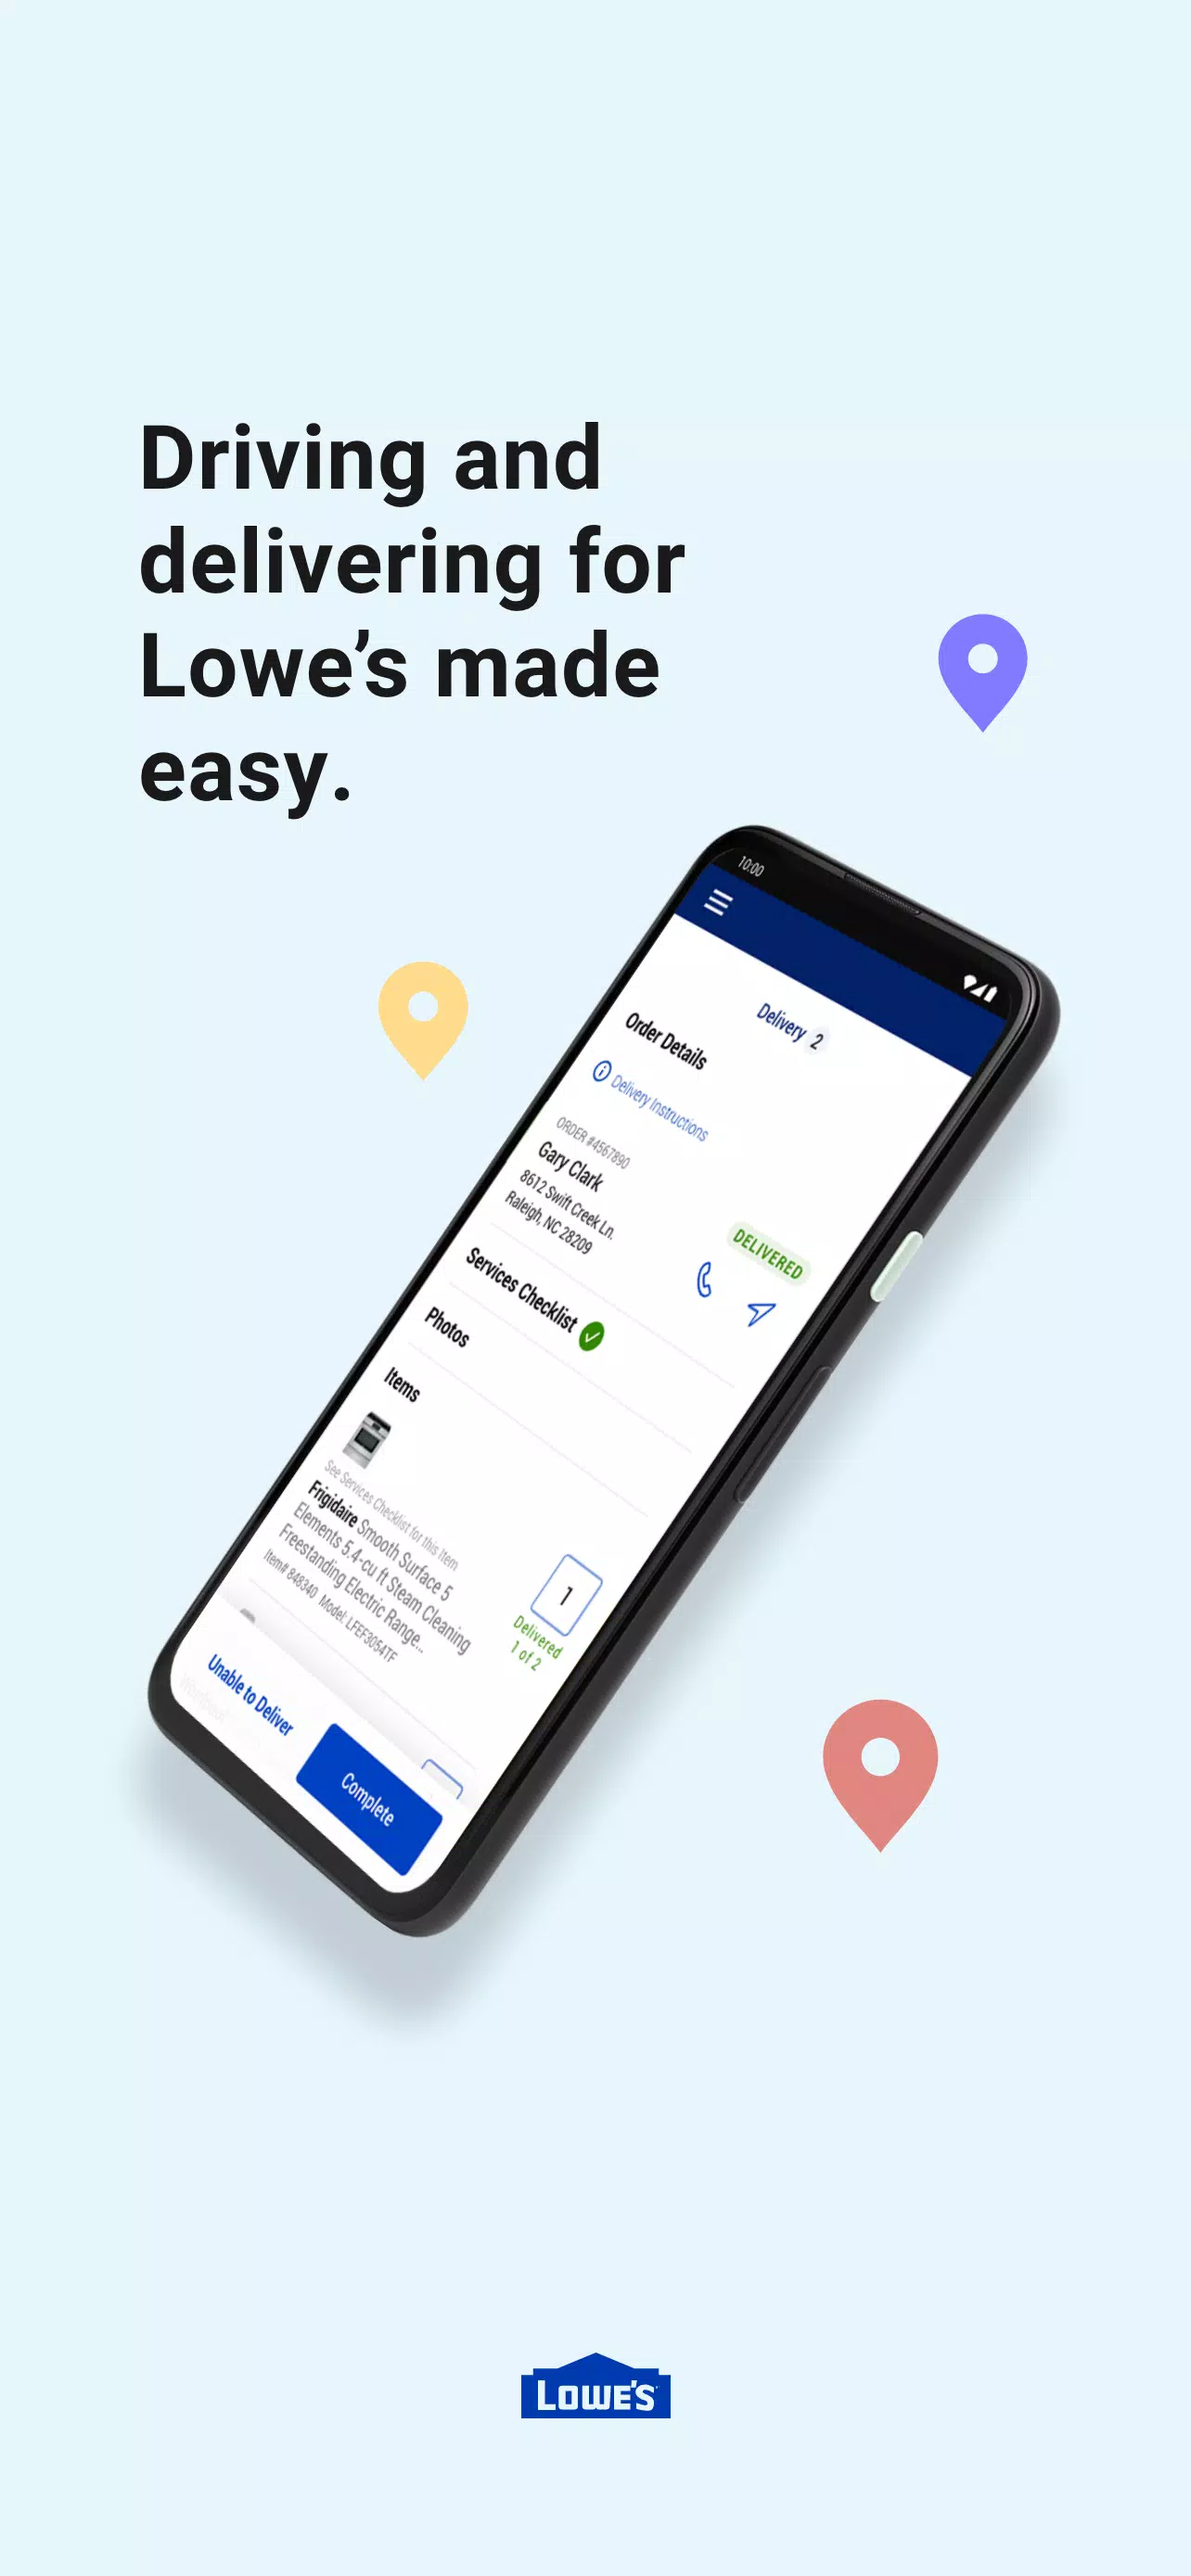 Delivered, by Lowe's for Android - APK Download